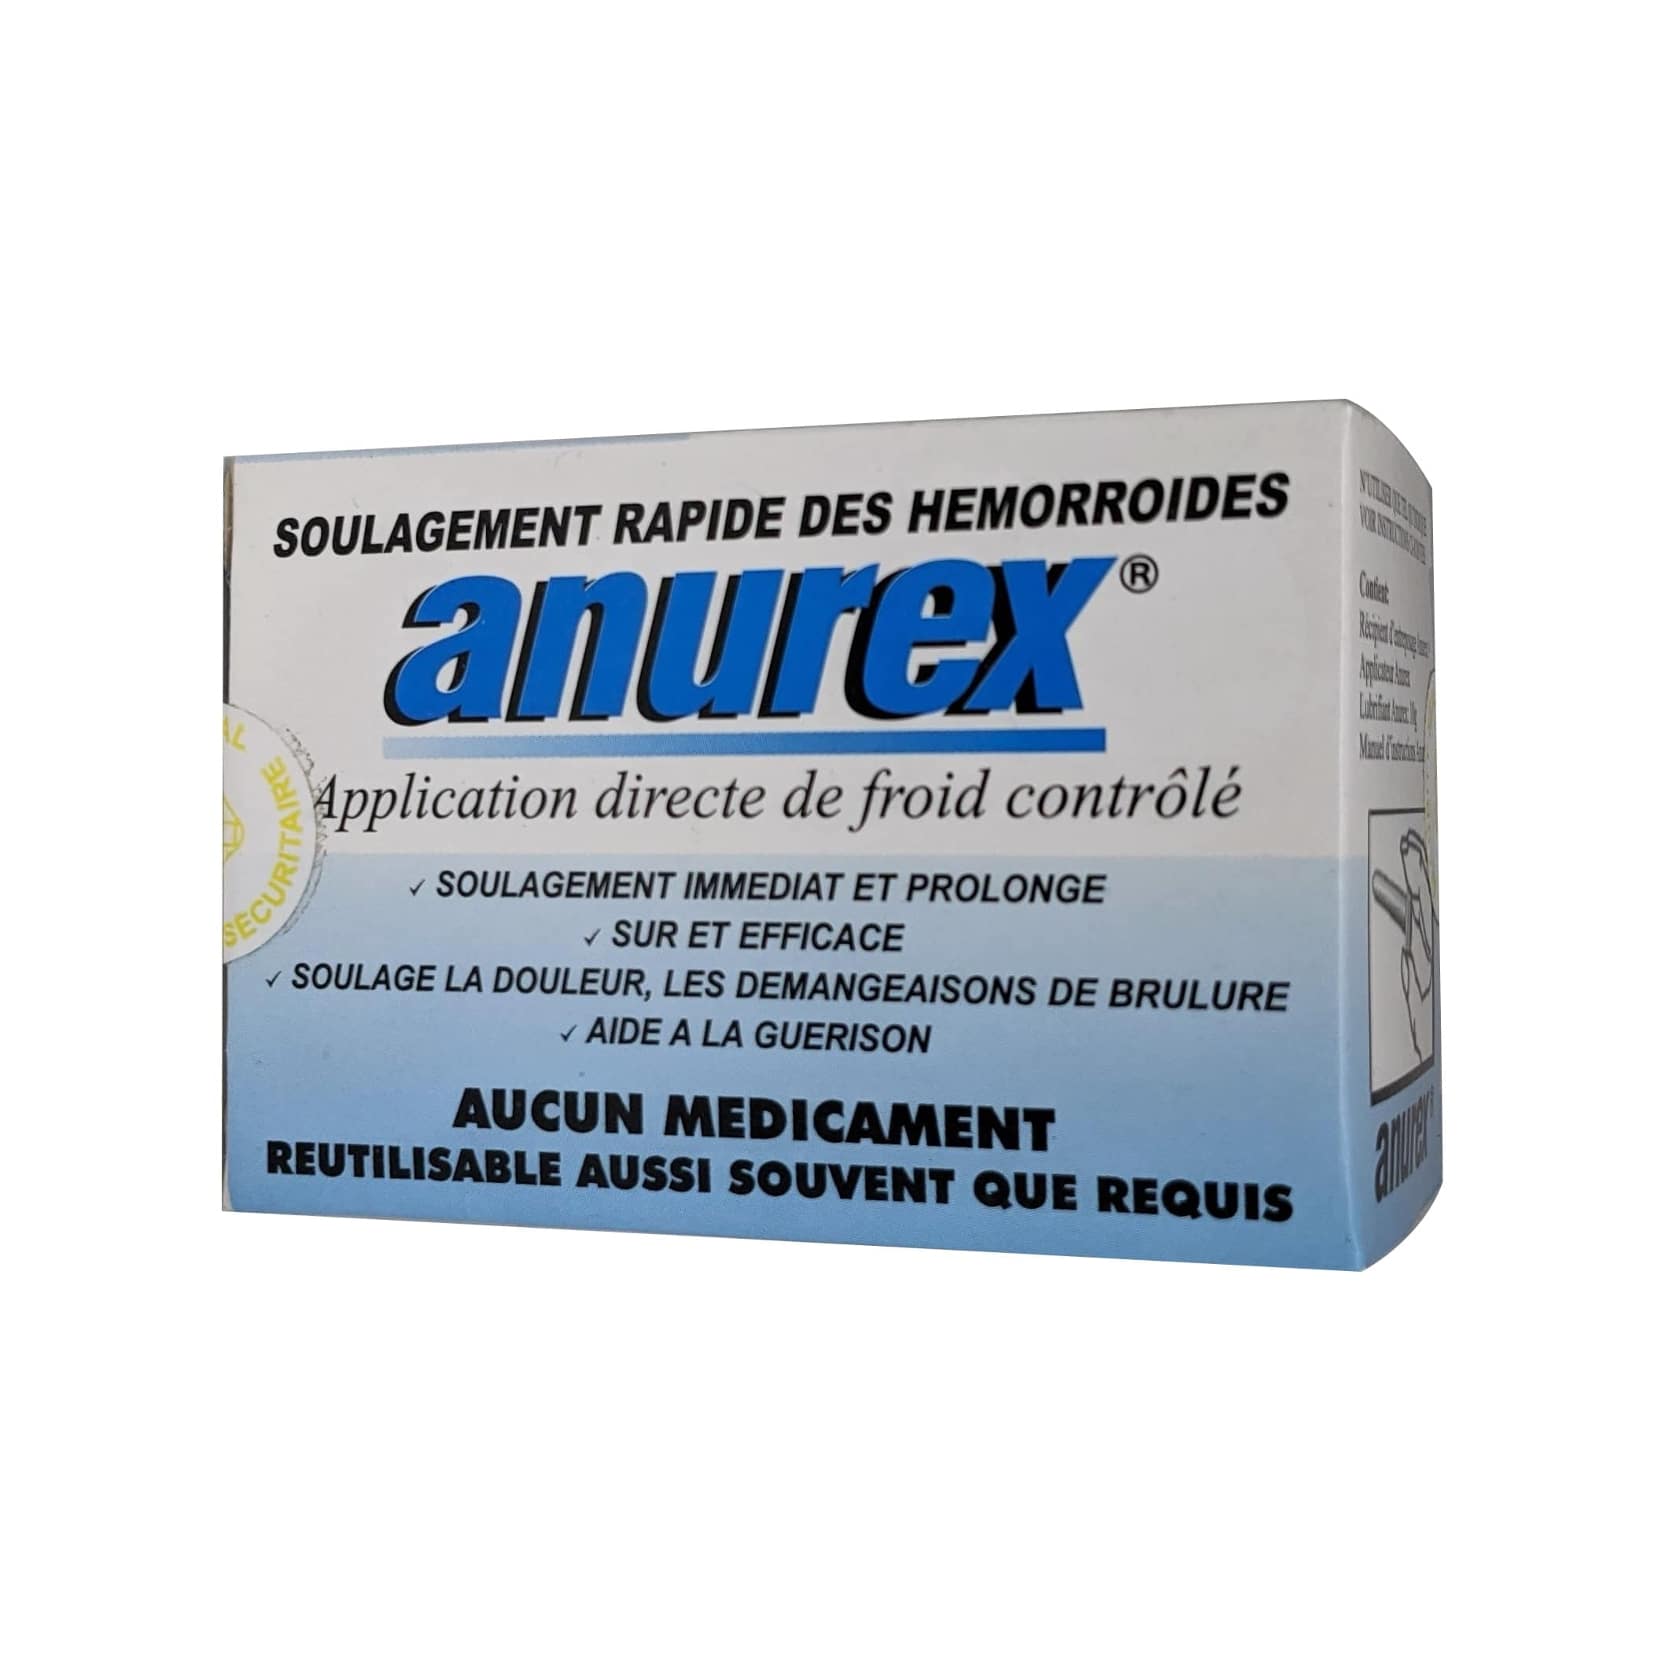 Anurex Controlled Cold Therapy Product package in French